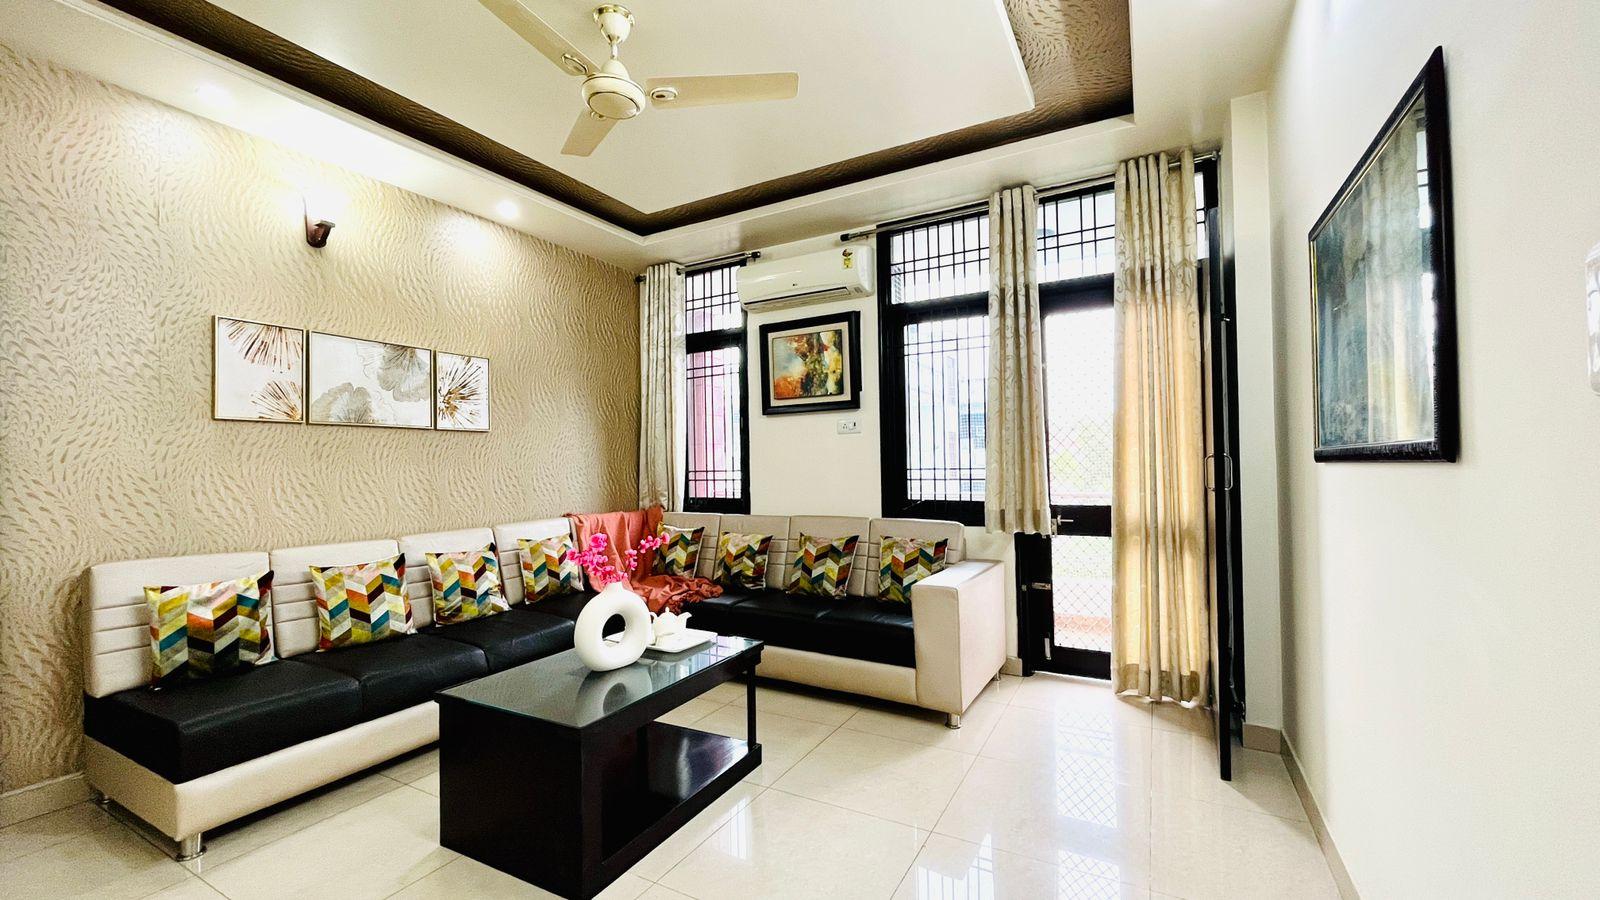 Service Apartments Noida: Your affordable second rental home